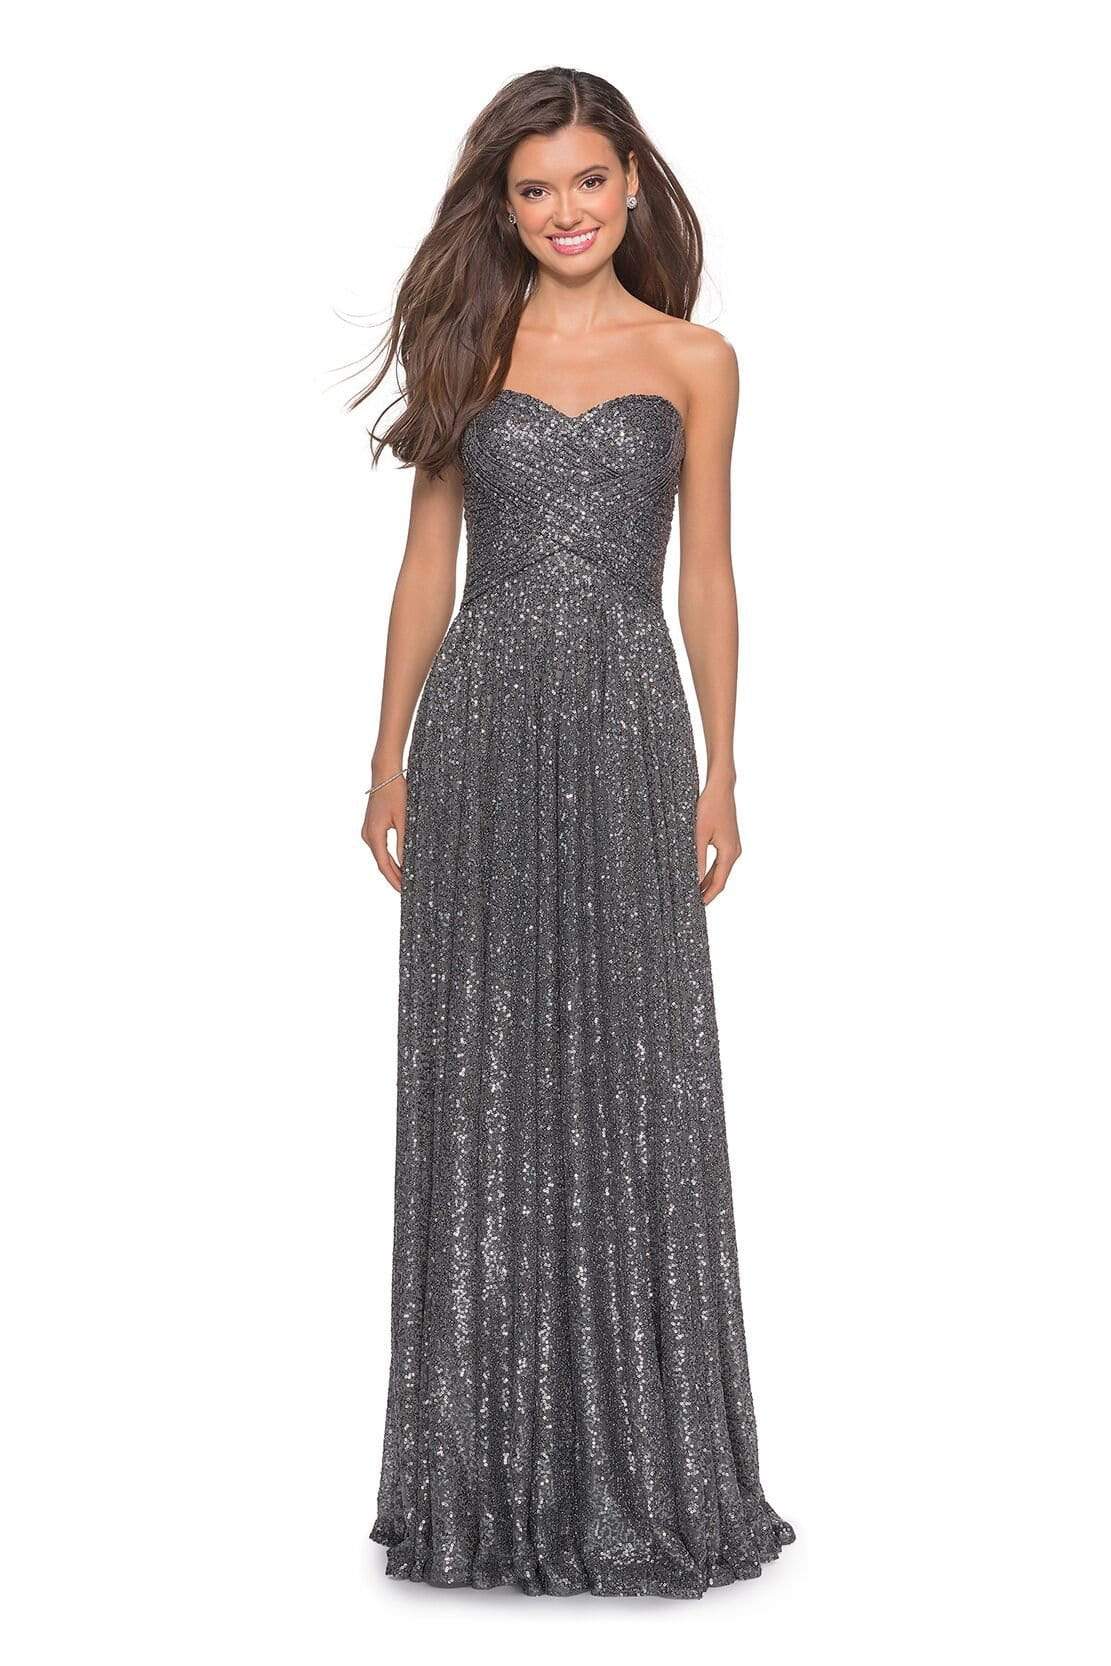 Image of La Femme - 27879 Ruched Sweetheart A-Line Evening Gown